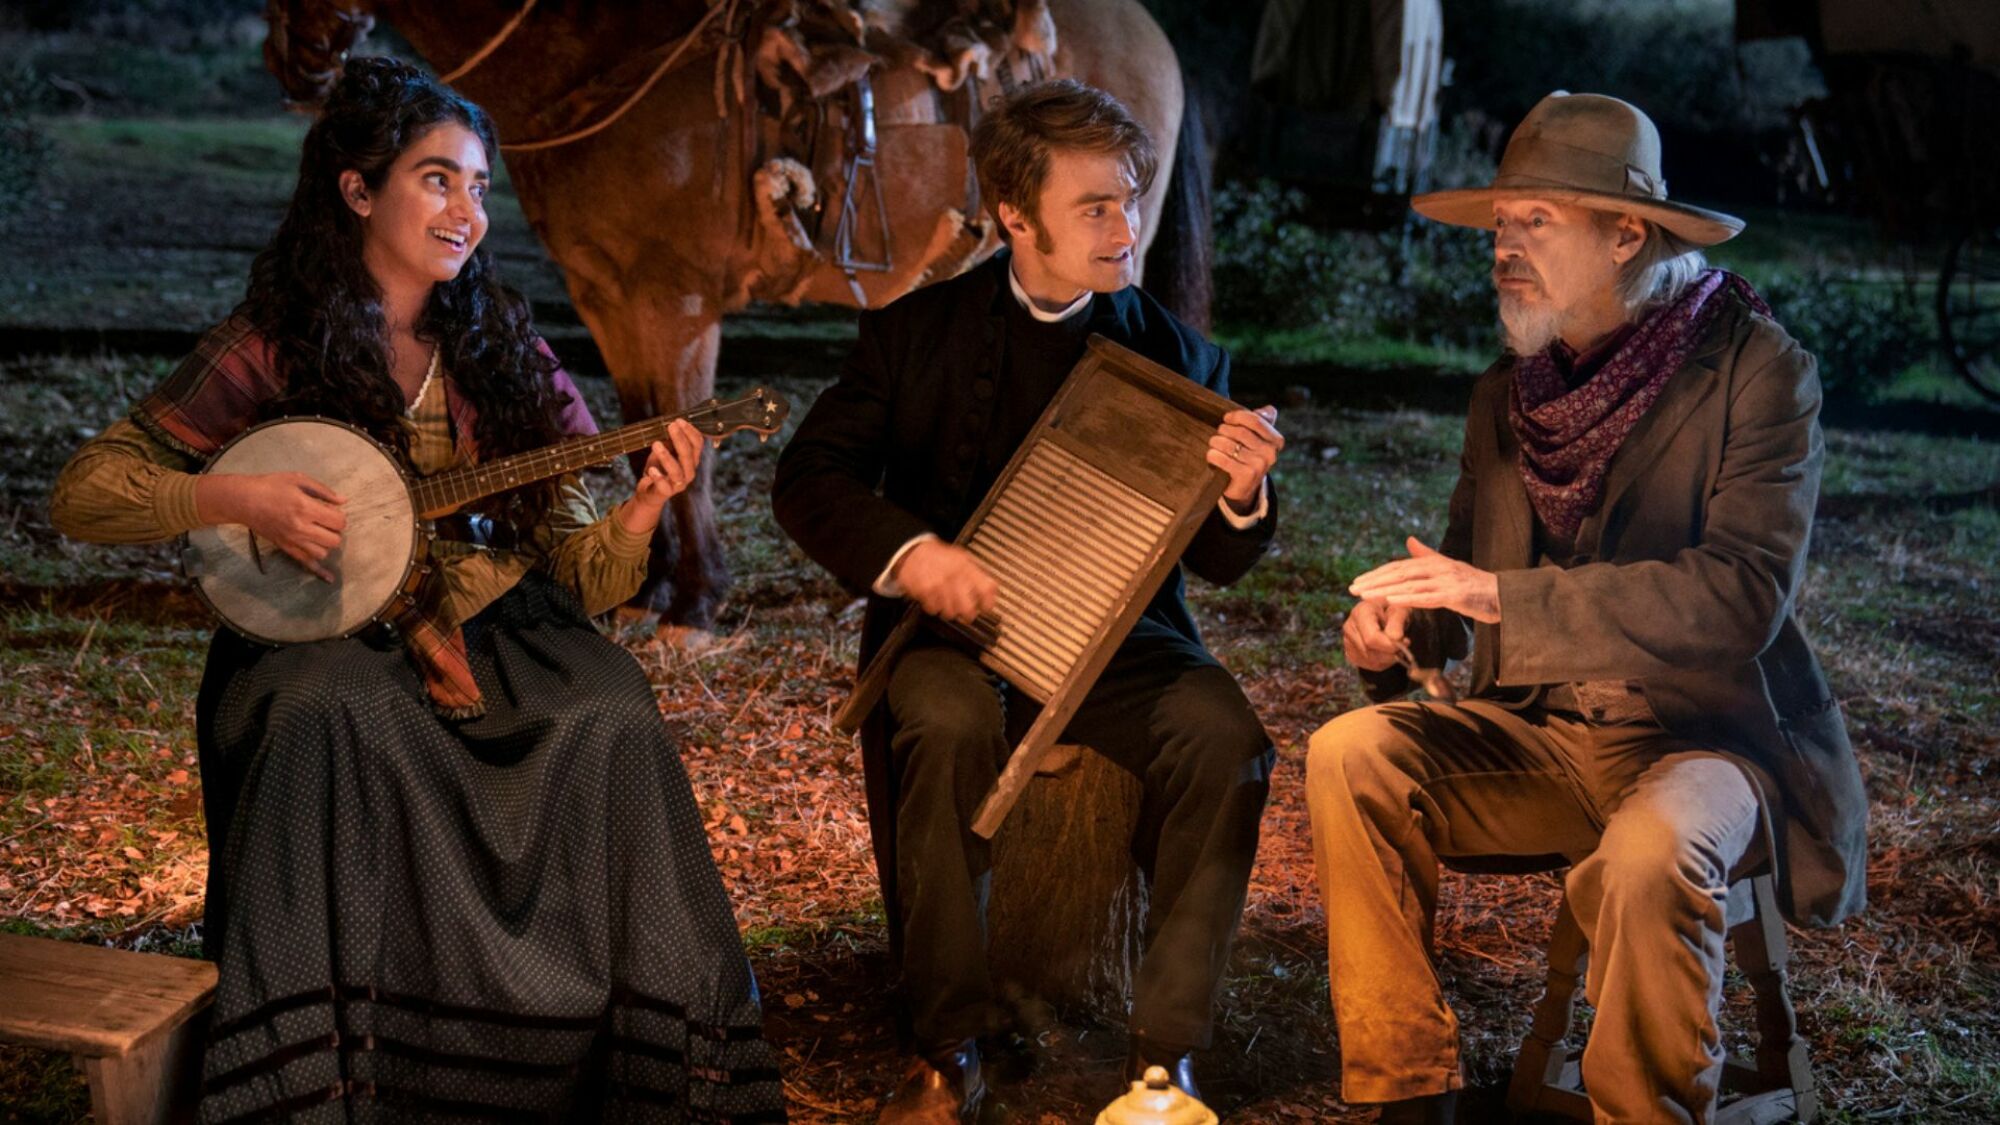 Three people play music around a campfire in the Western.